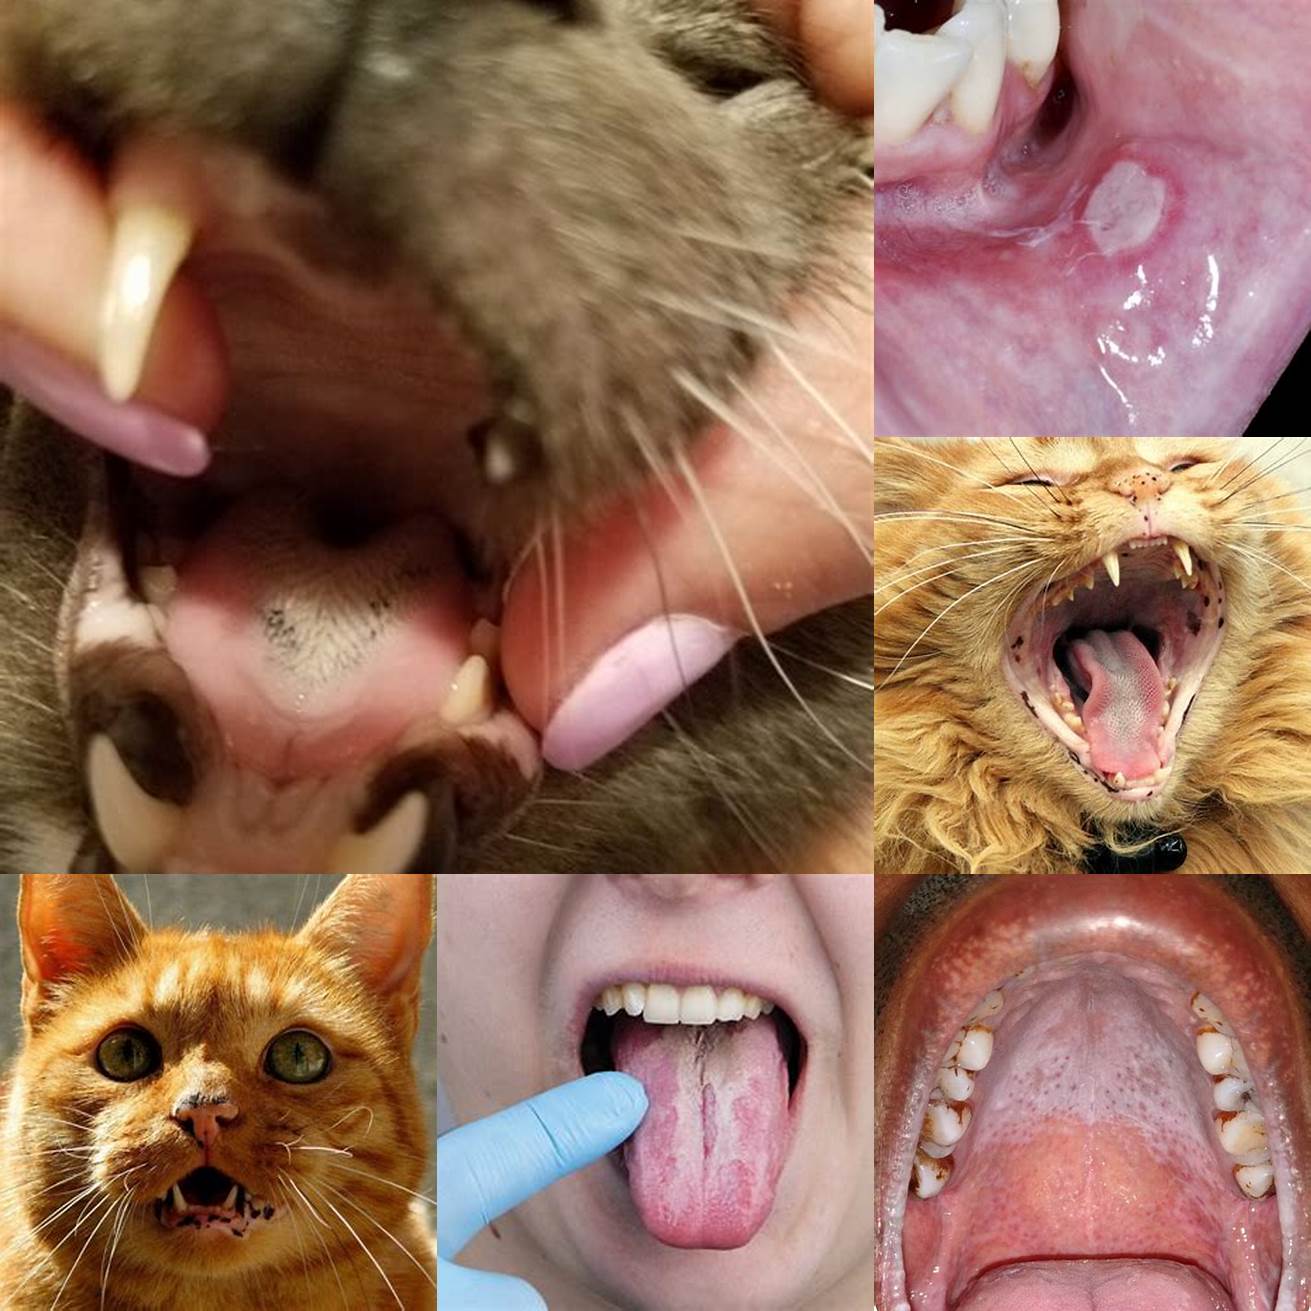 Injury Trauma to the tongue or mouth can also cause black spots to appear